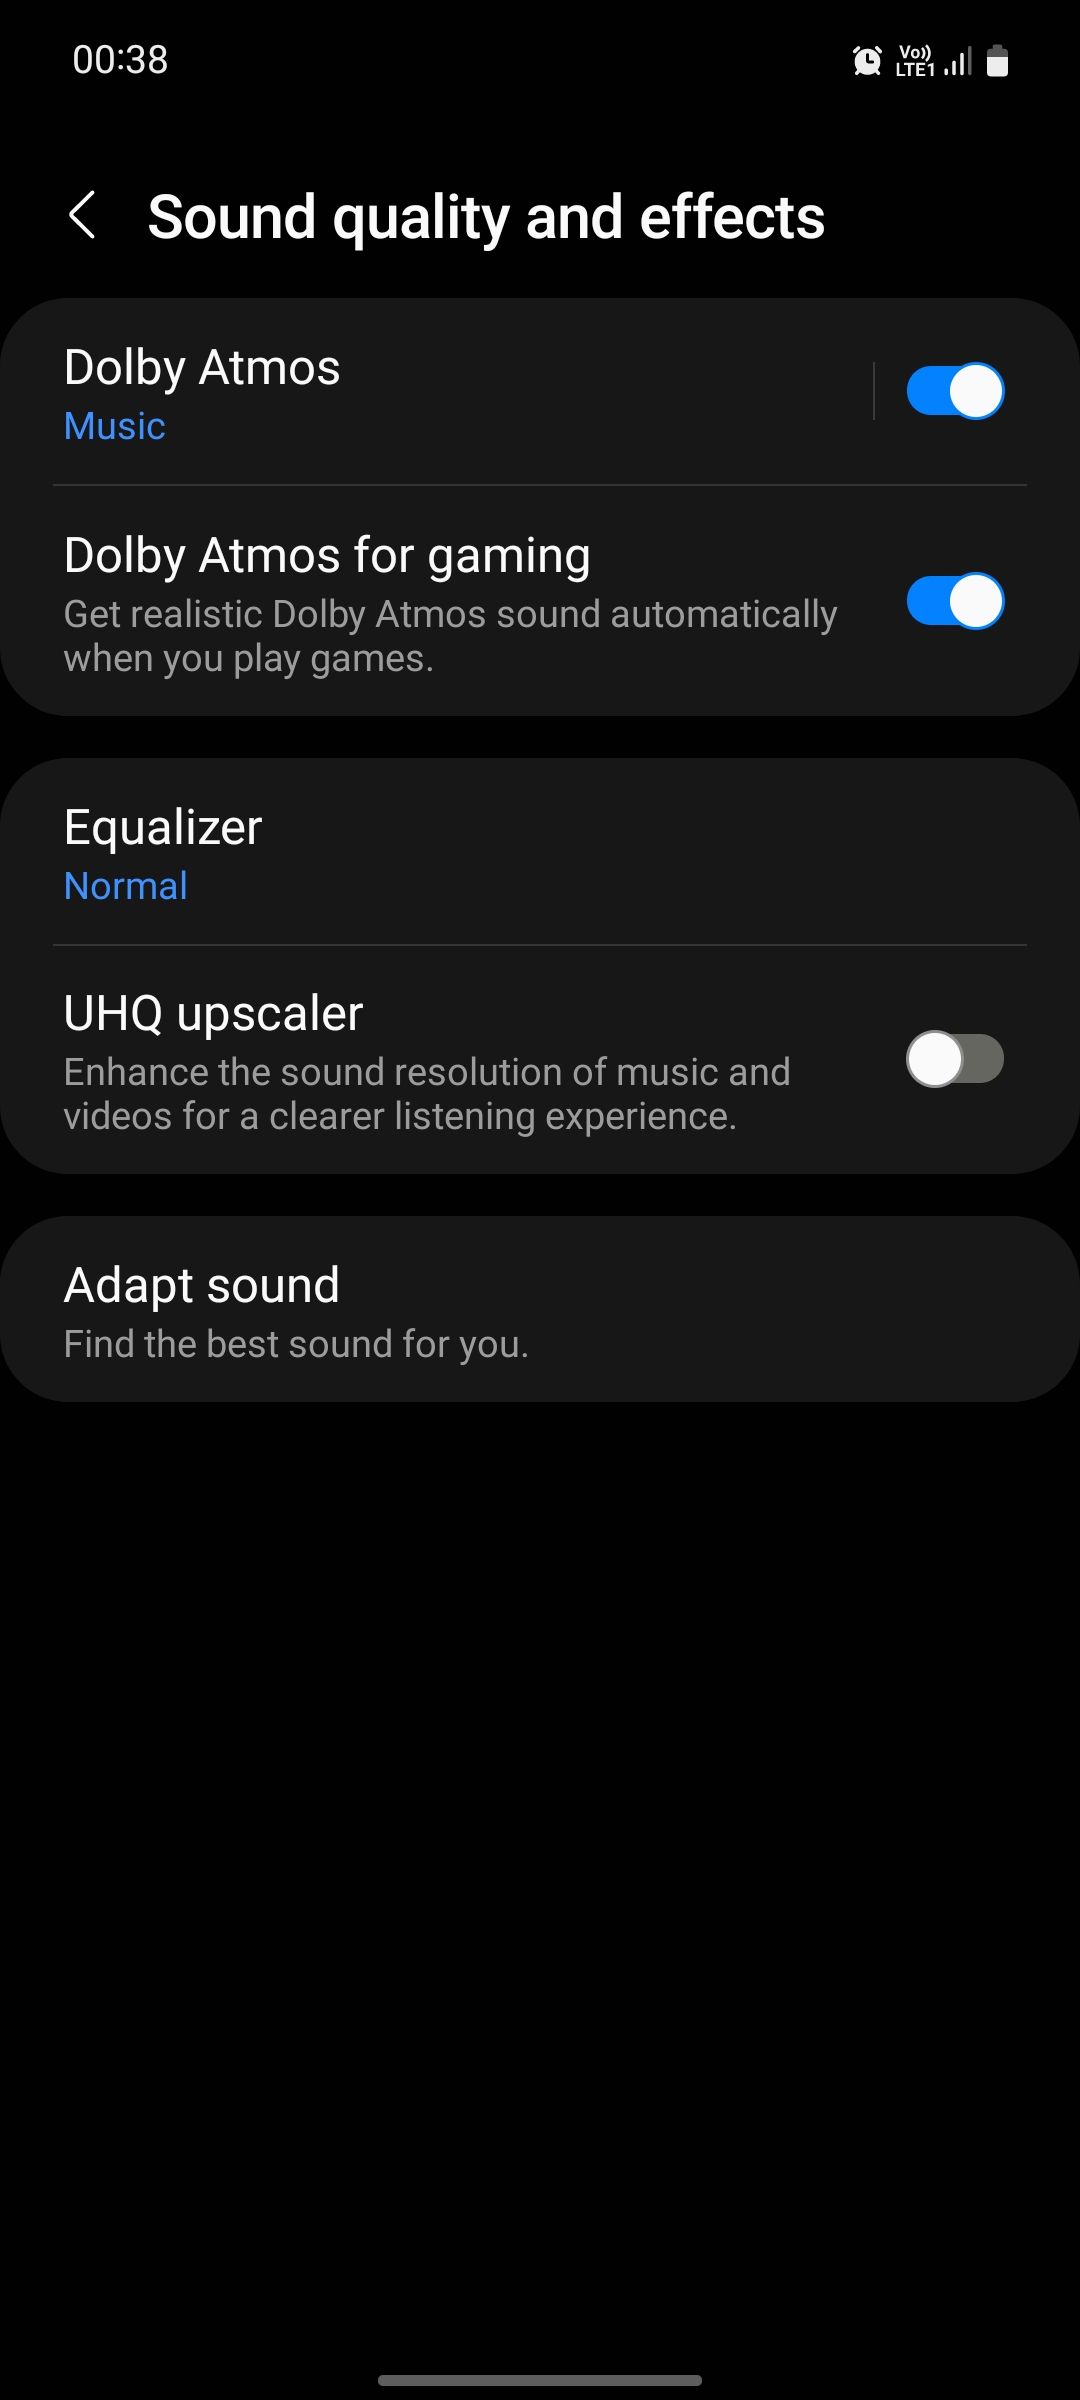 Samsung Sound quality and effects